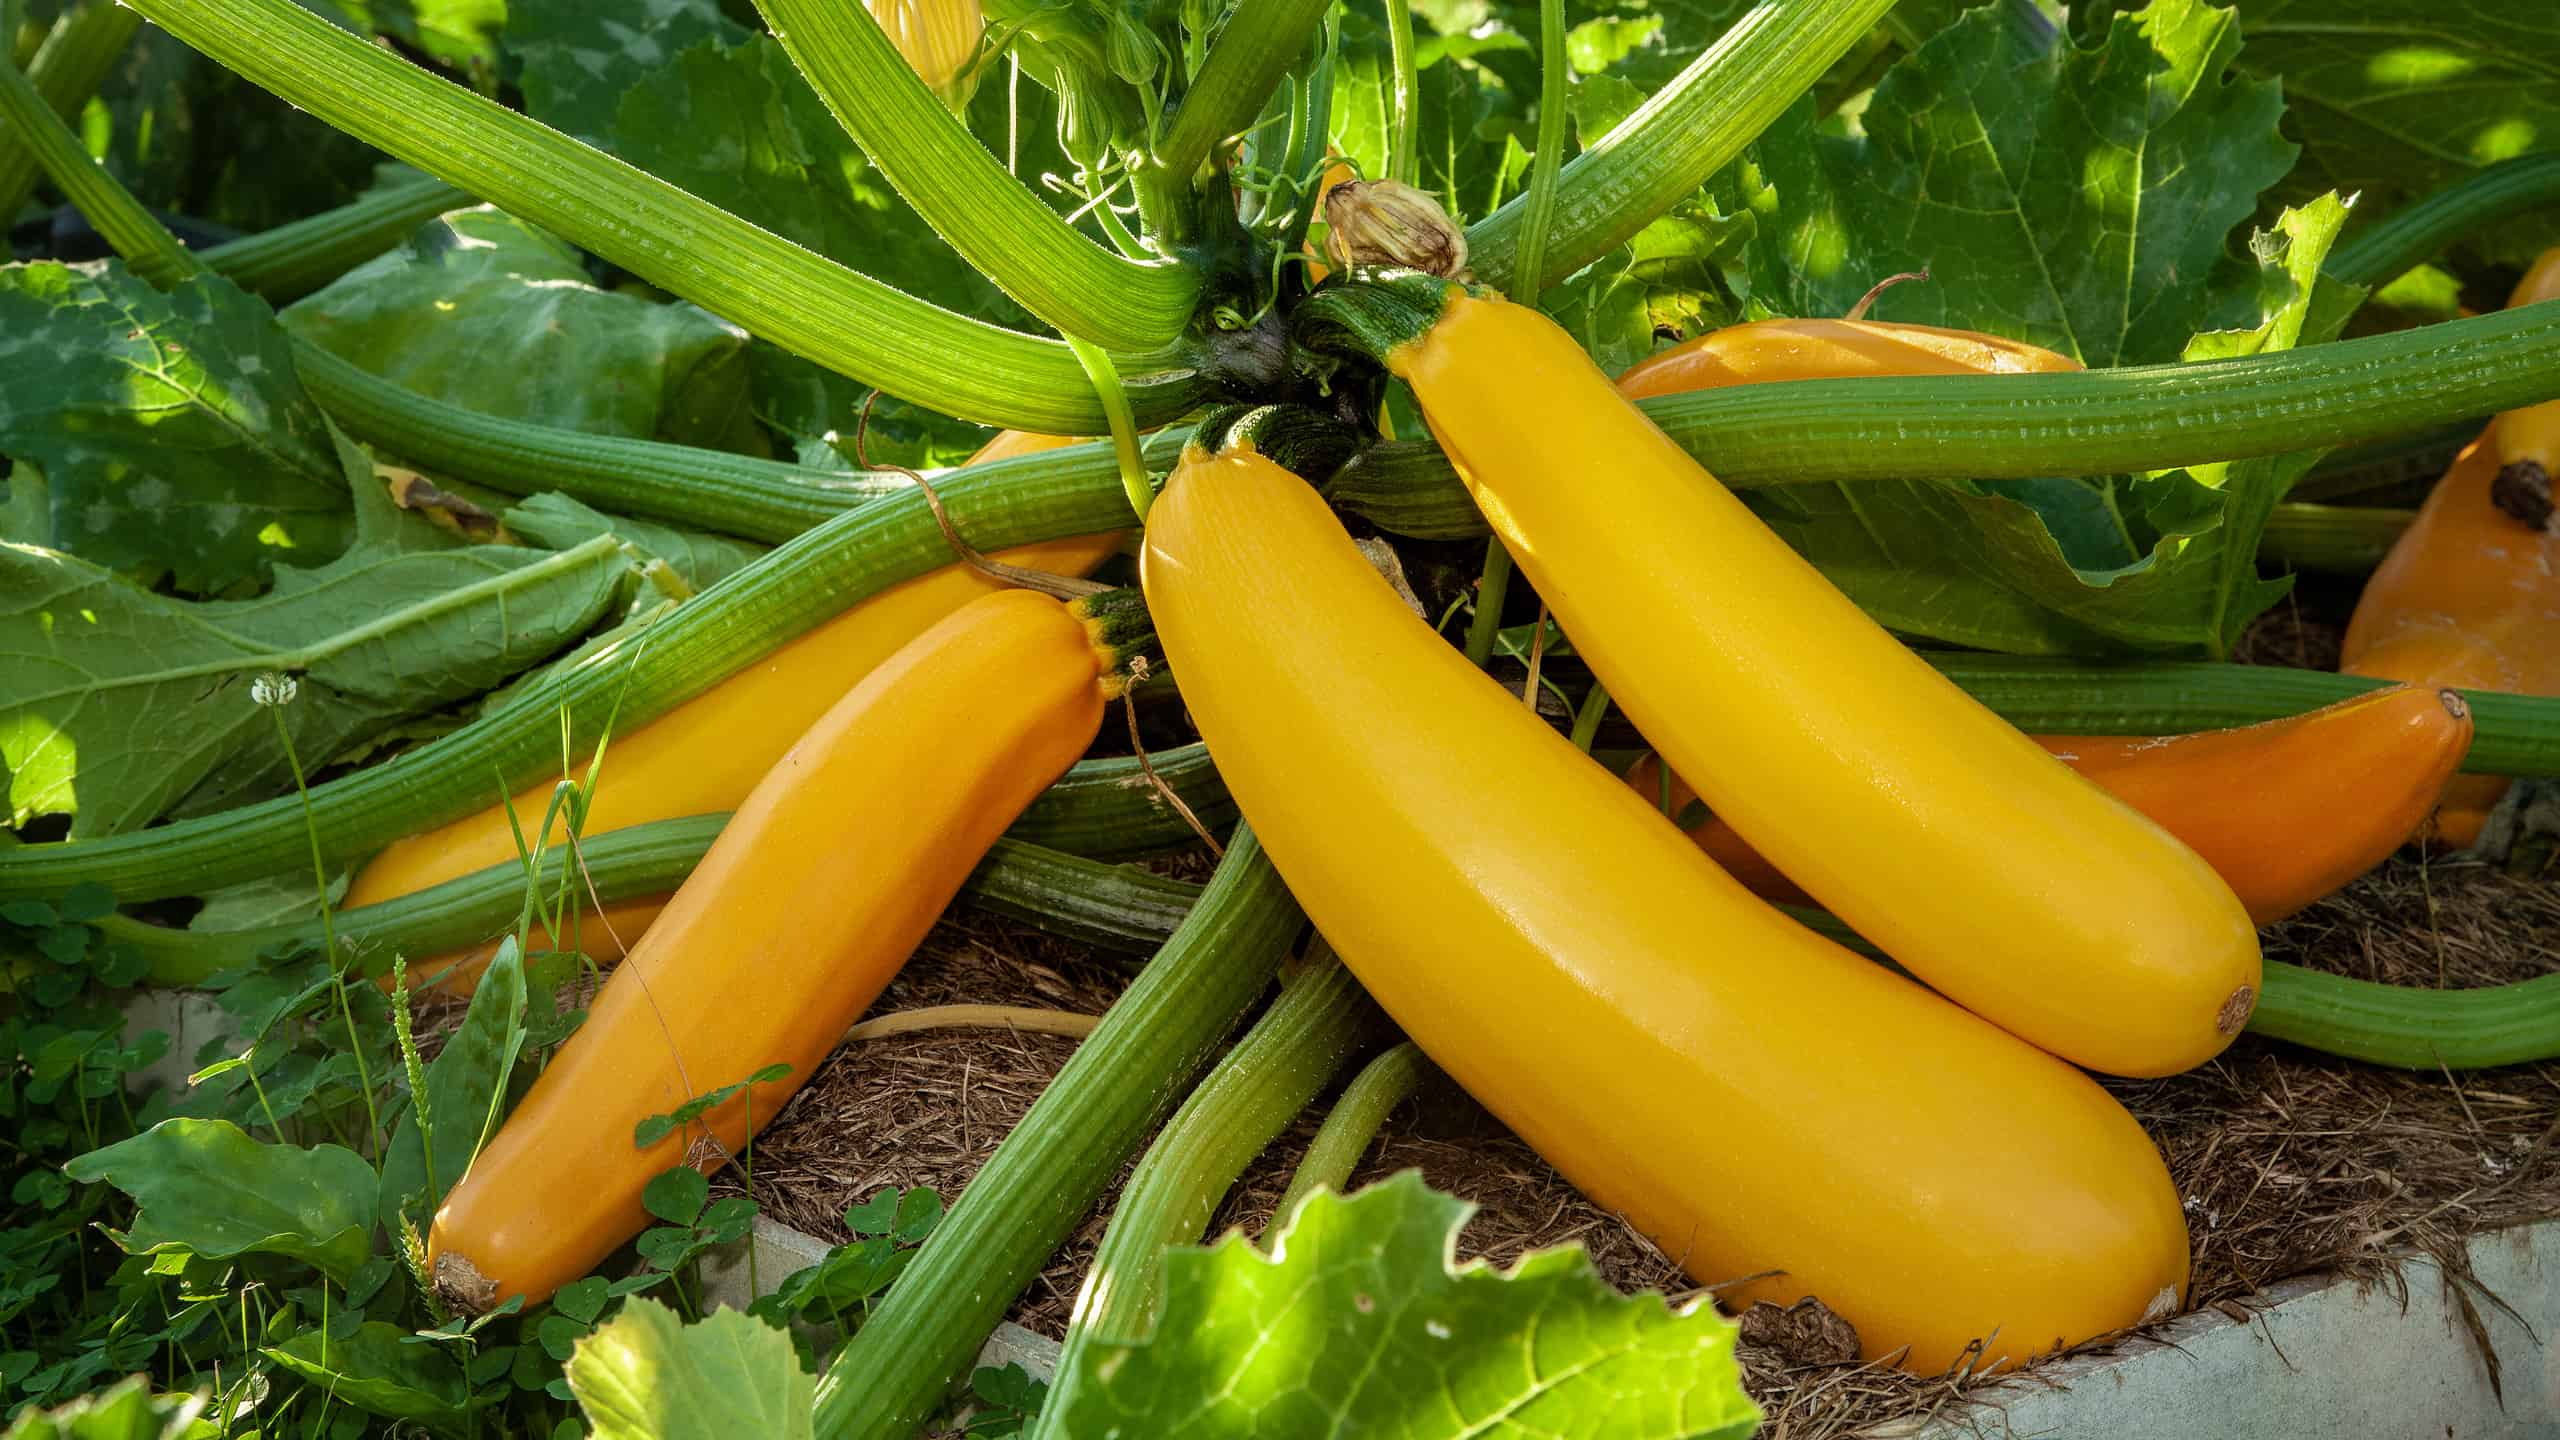 Image of Squash vegetable to grow in summer